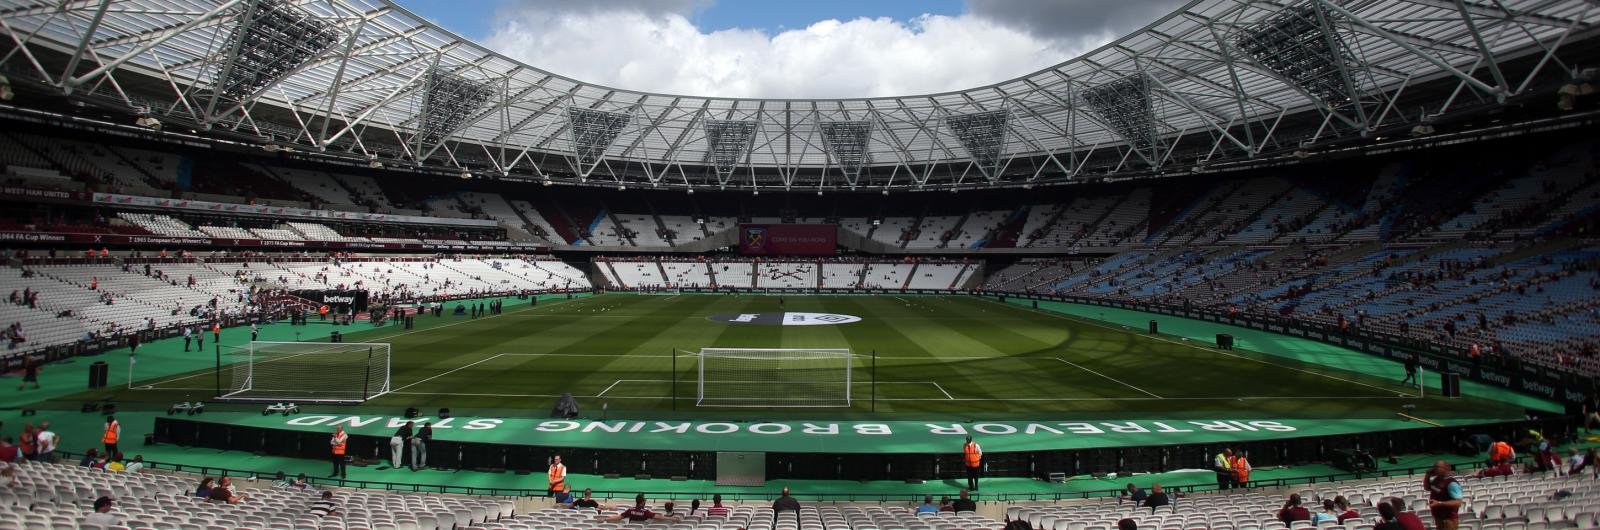 West Ham United vs AFC Bournemouth: Preview & Prediction